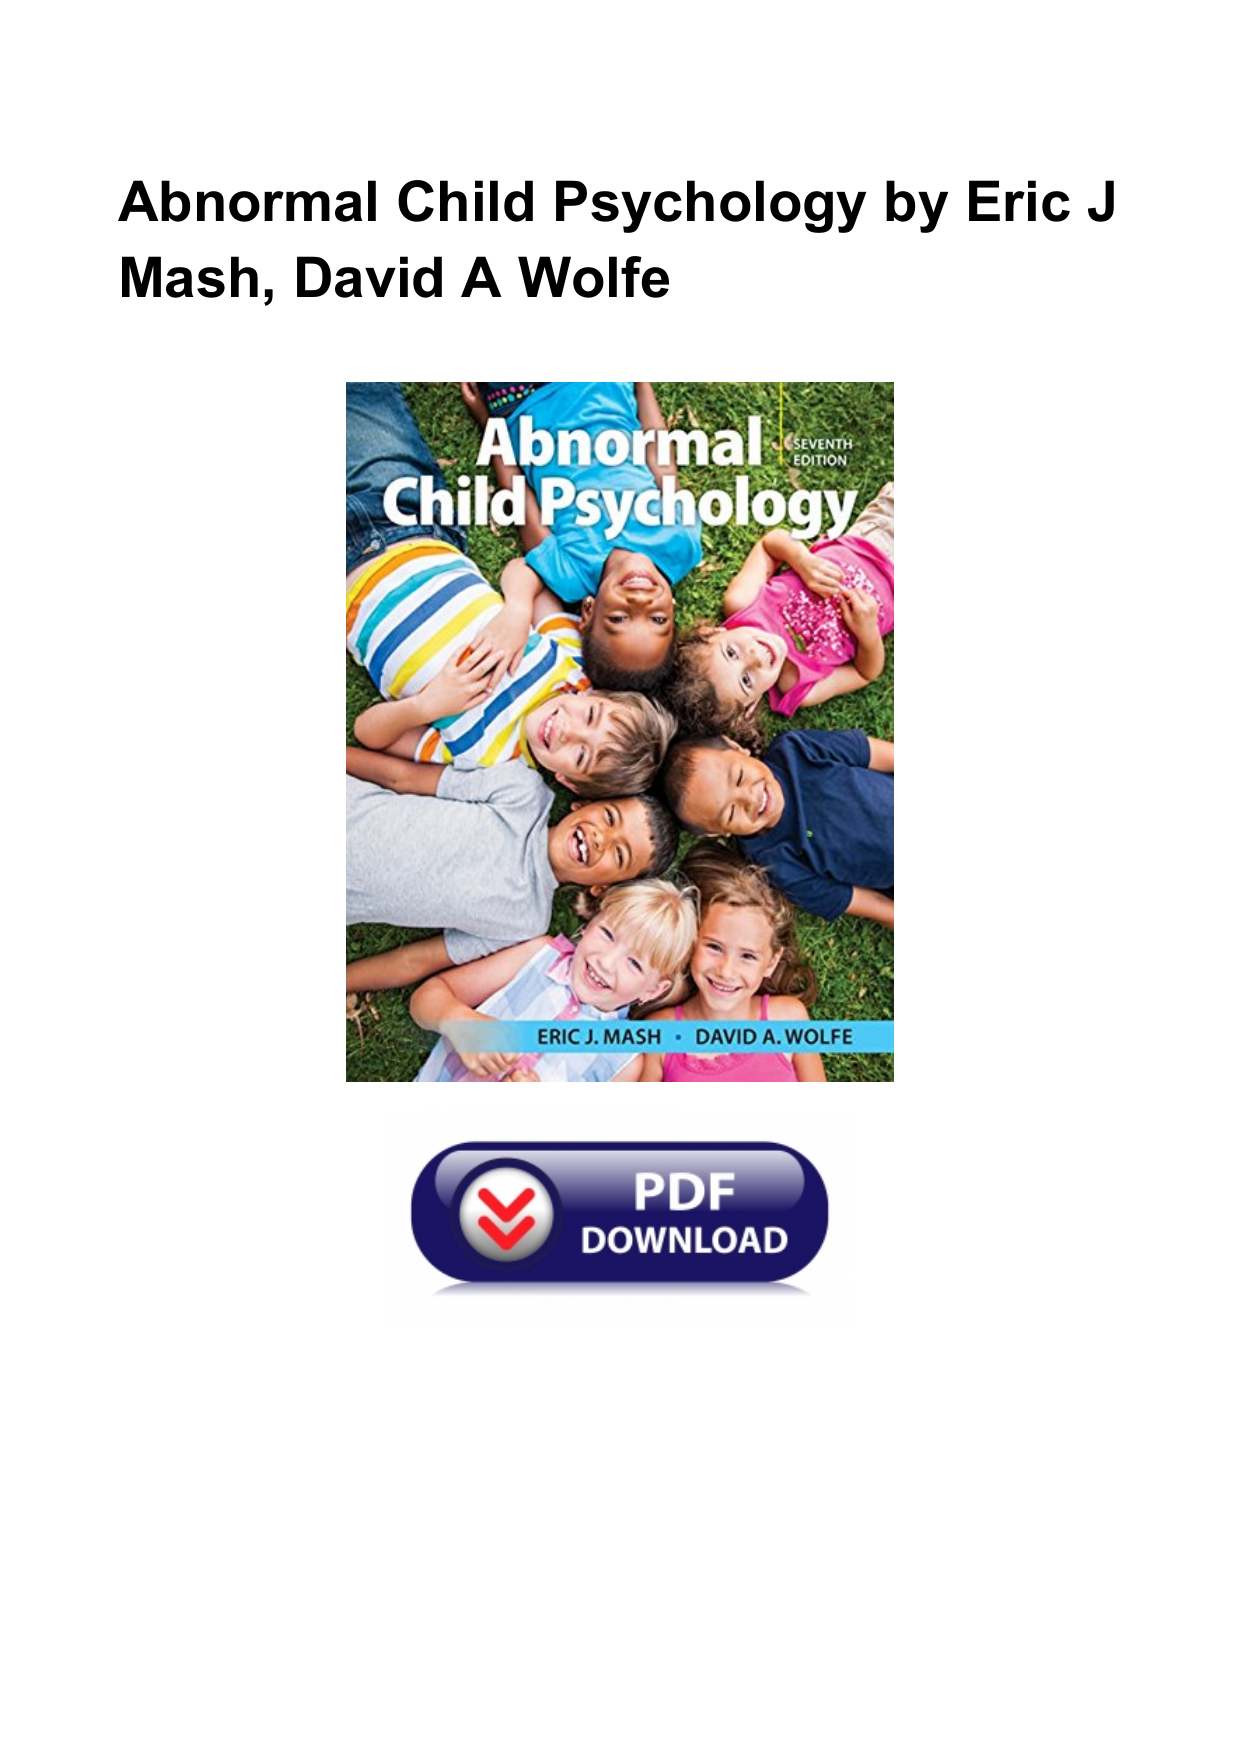 Abnormal child psychology 7th edition pdf download ddr pc game download